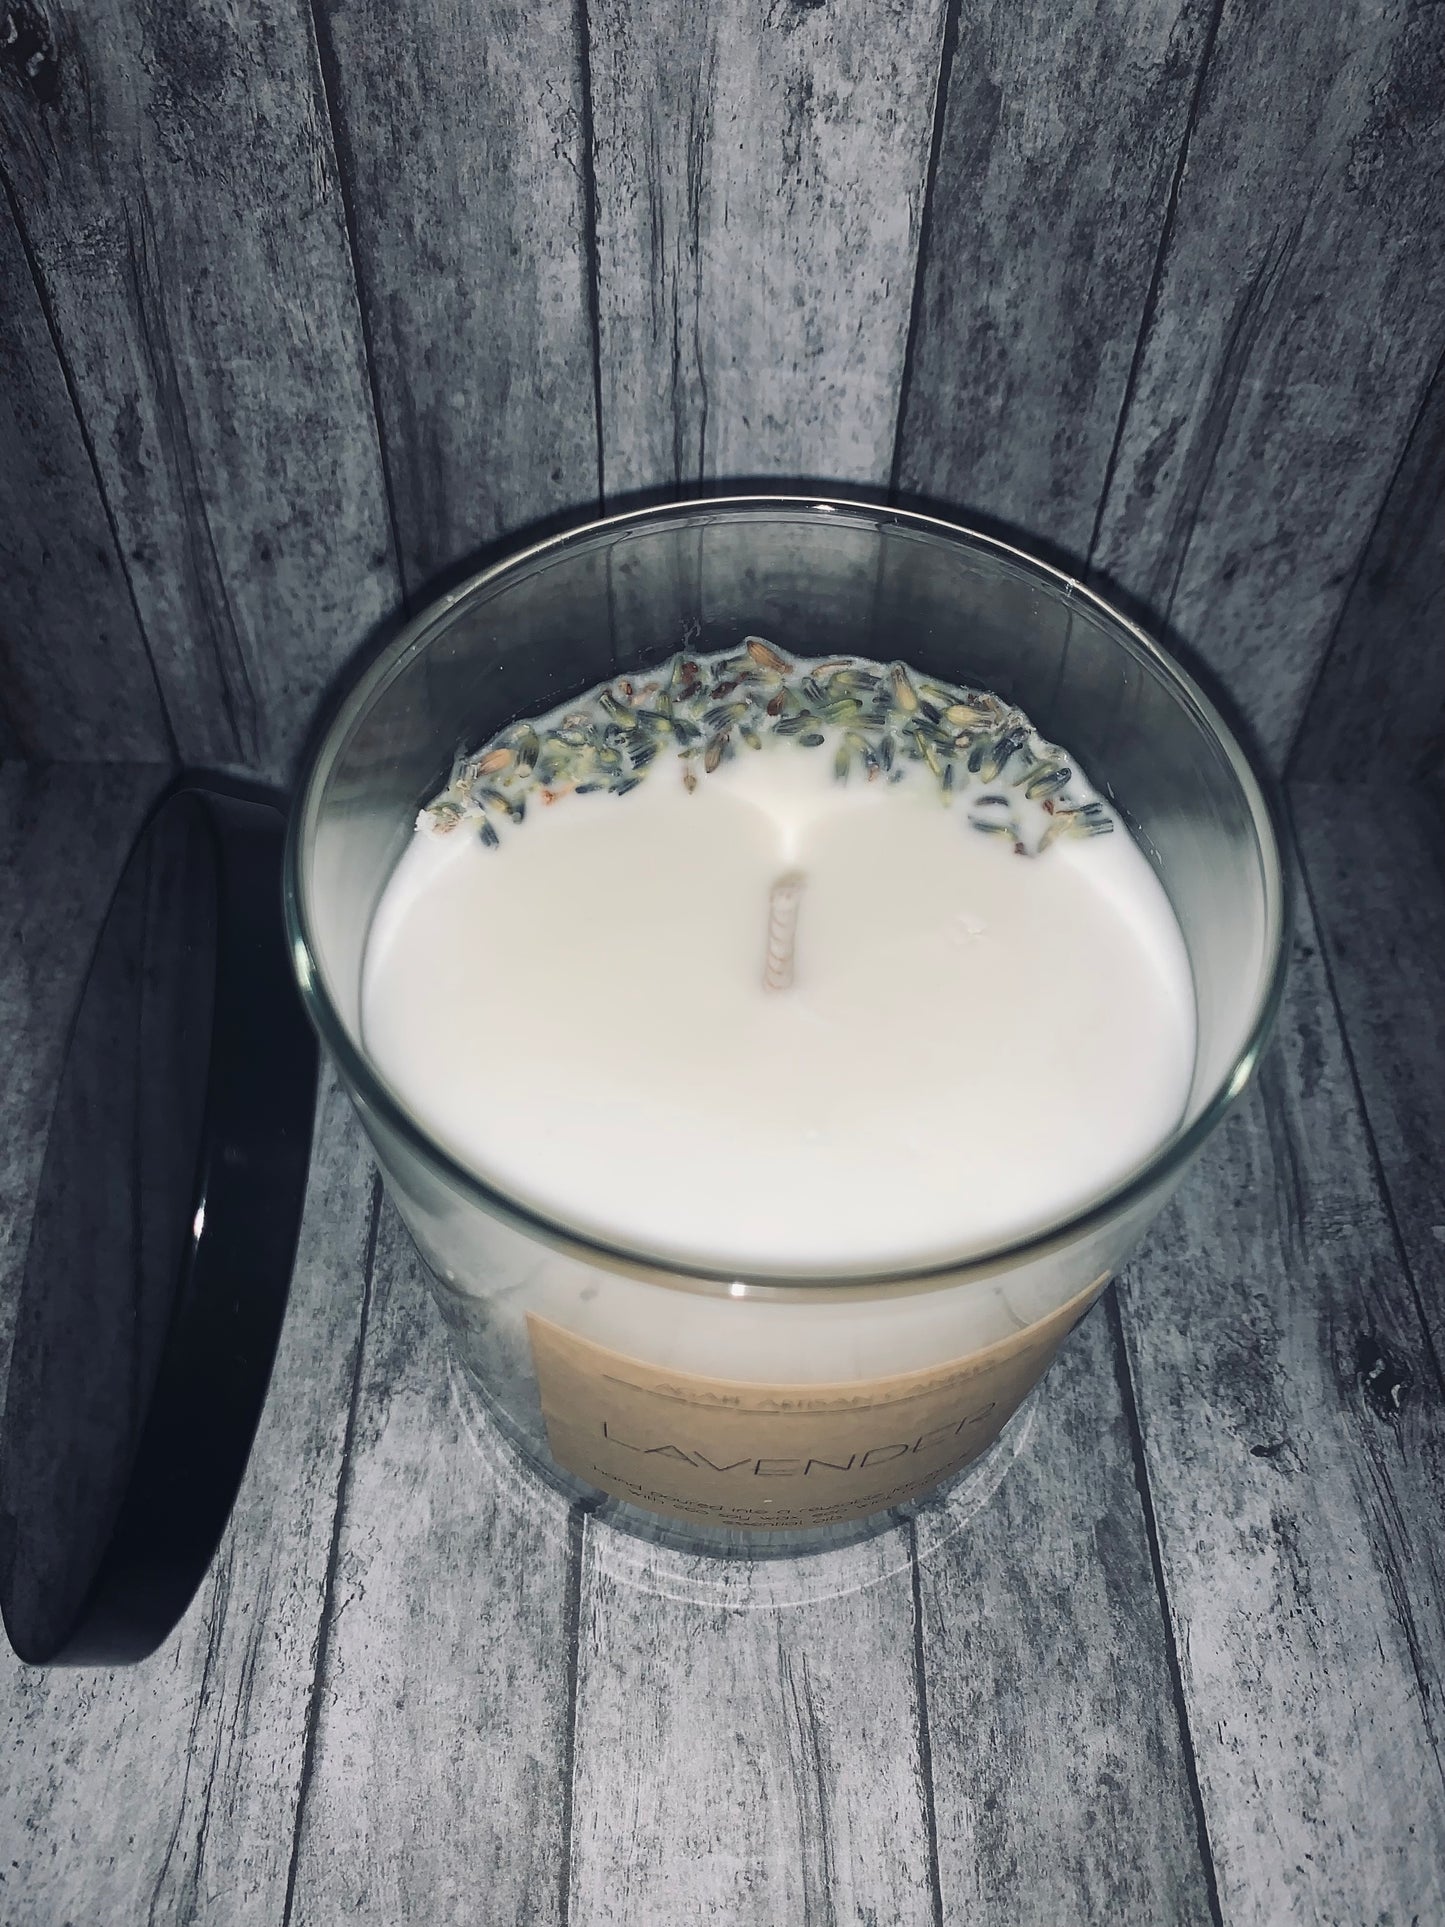 Lux Collection Lavender Candle